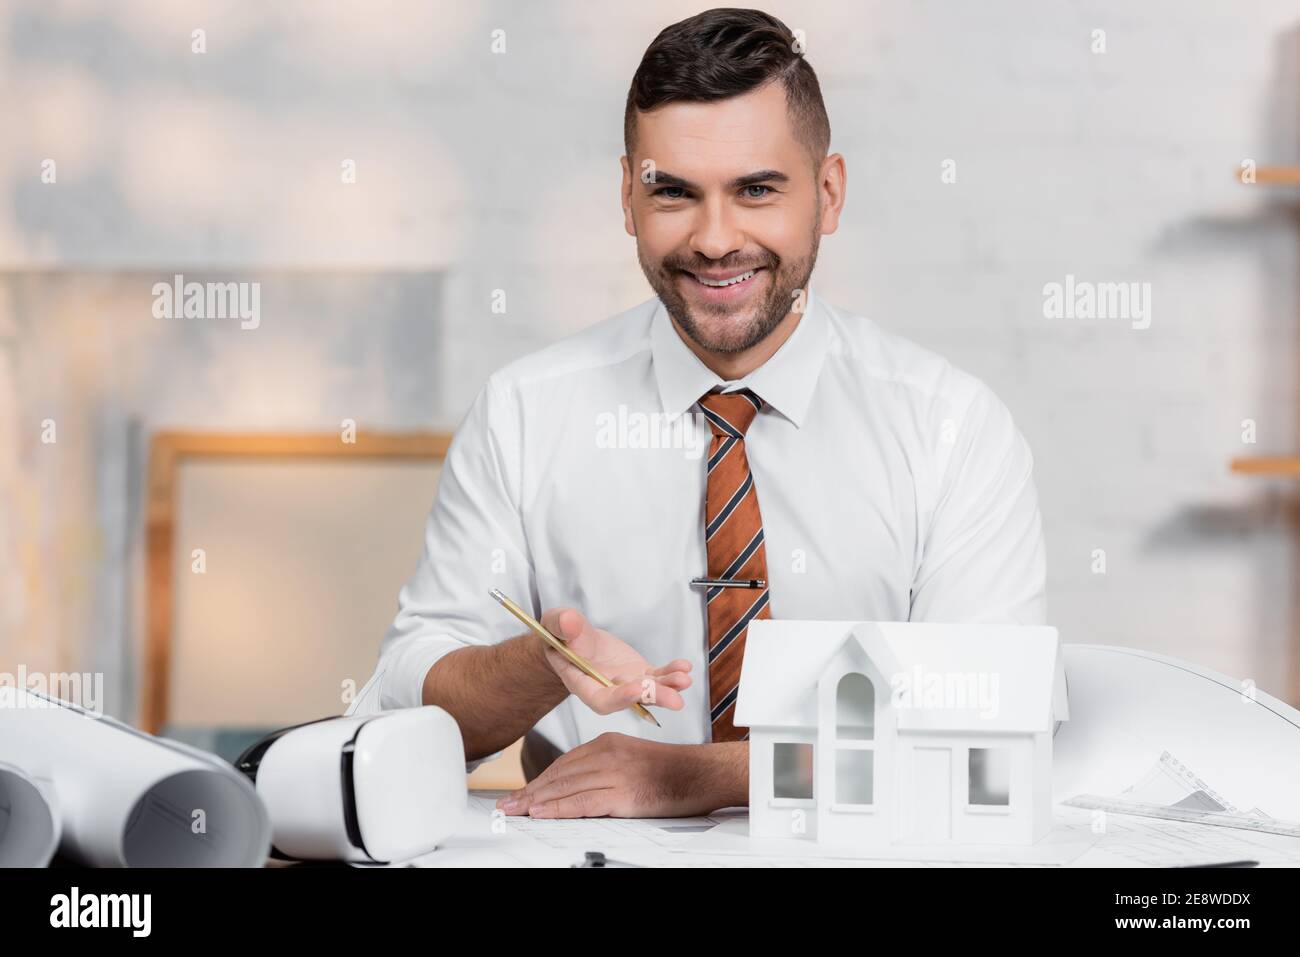 happy architect looking at camera while pointing at house model Stock Photo